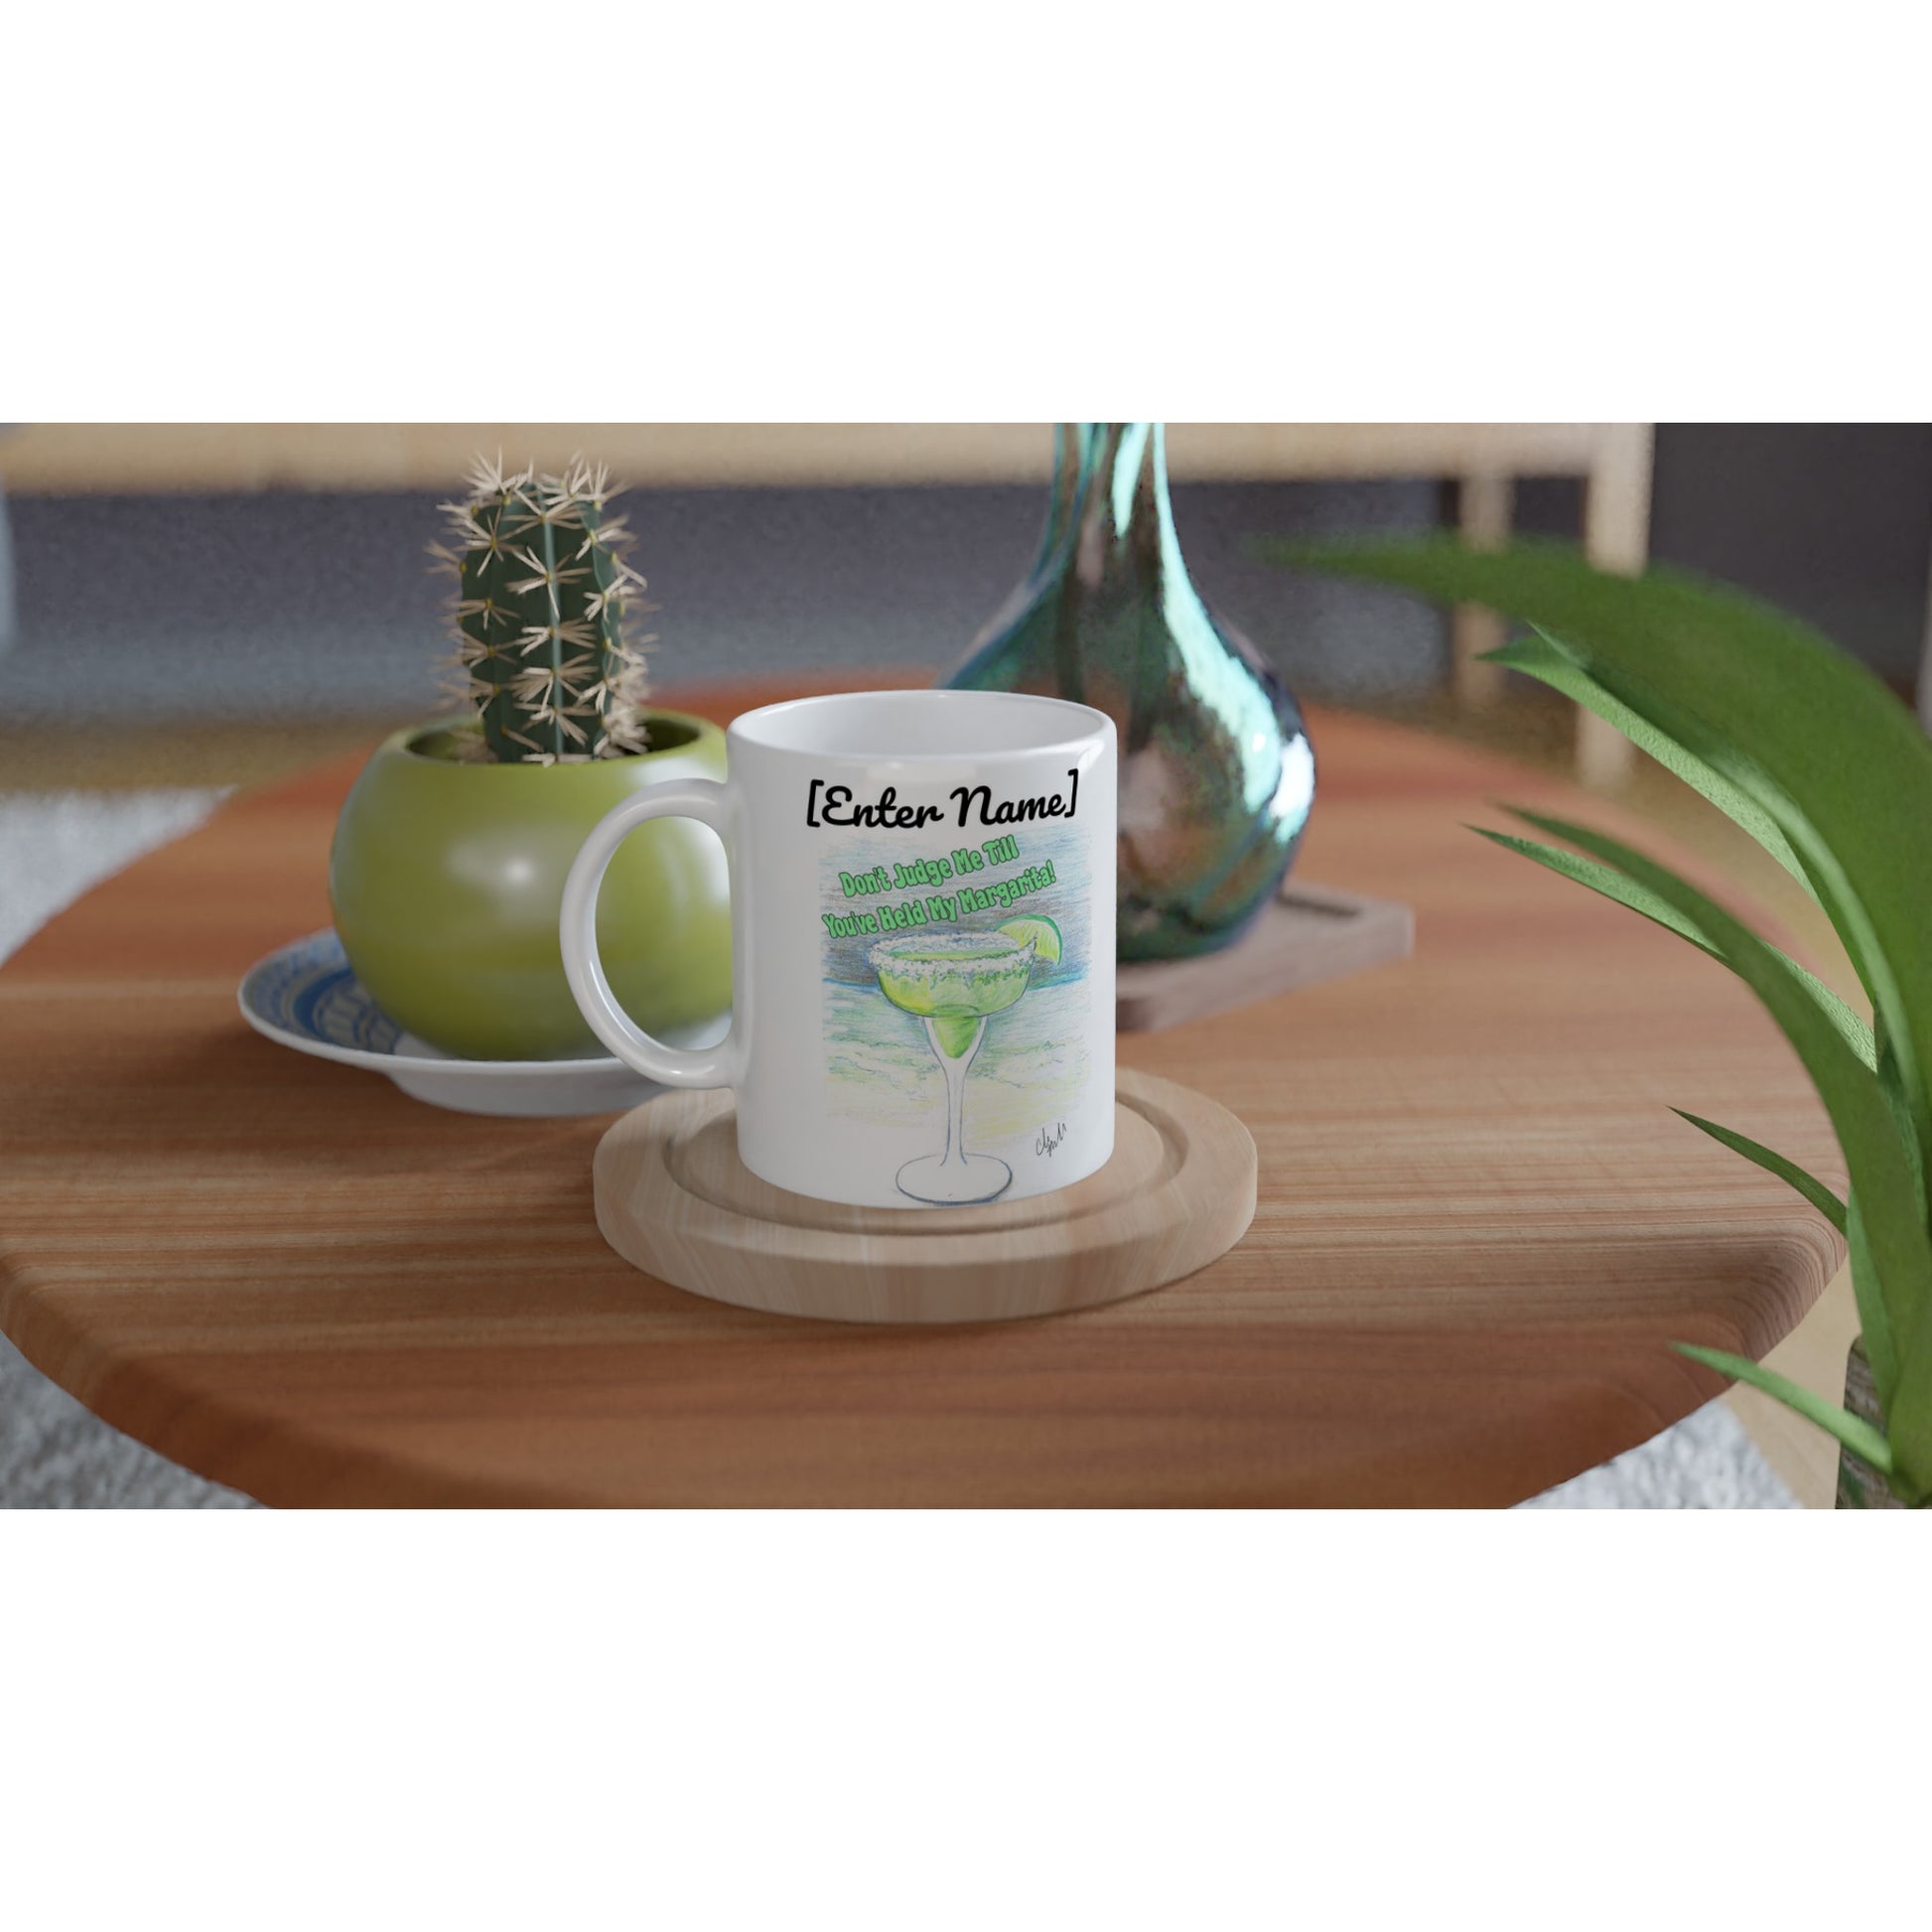 Personalized white ceramic 11oz mug with motto Don't Judge Me till You've Held my Margarita coffee mug dishwasher and microwave safe from WhatYa Say Apparel sitting on coaster on coffee table with green potted cactus and silver vase.